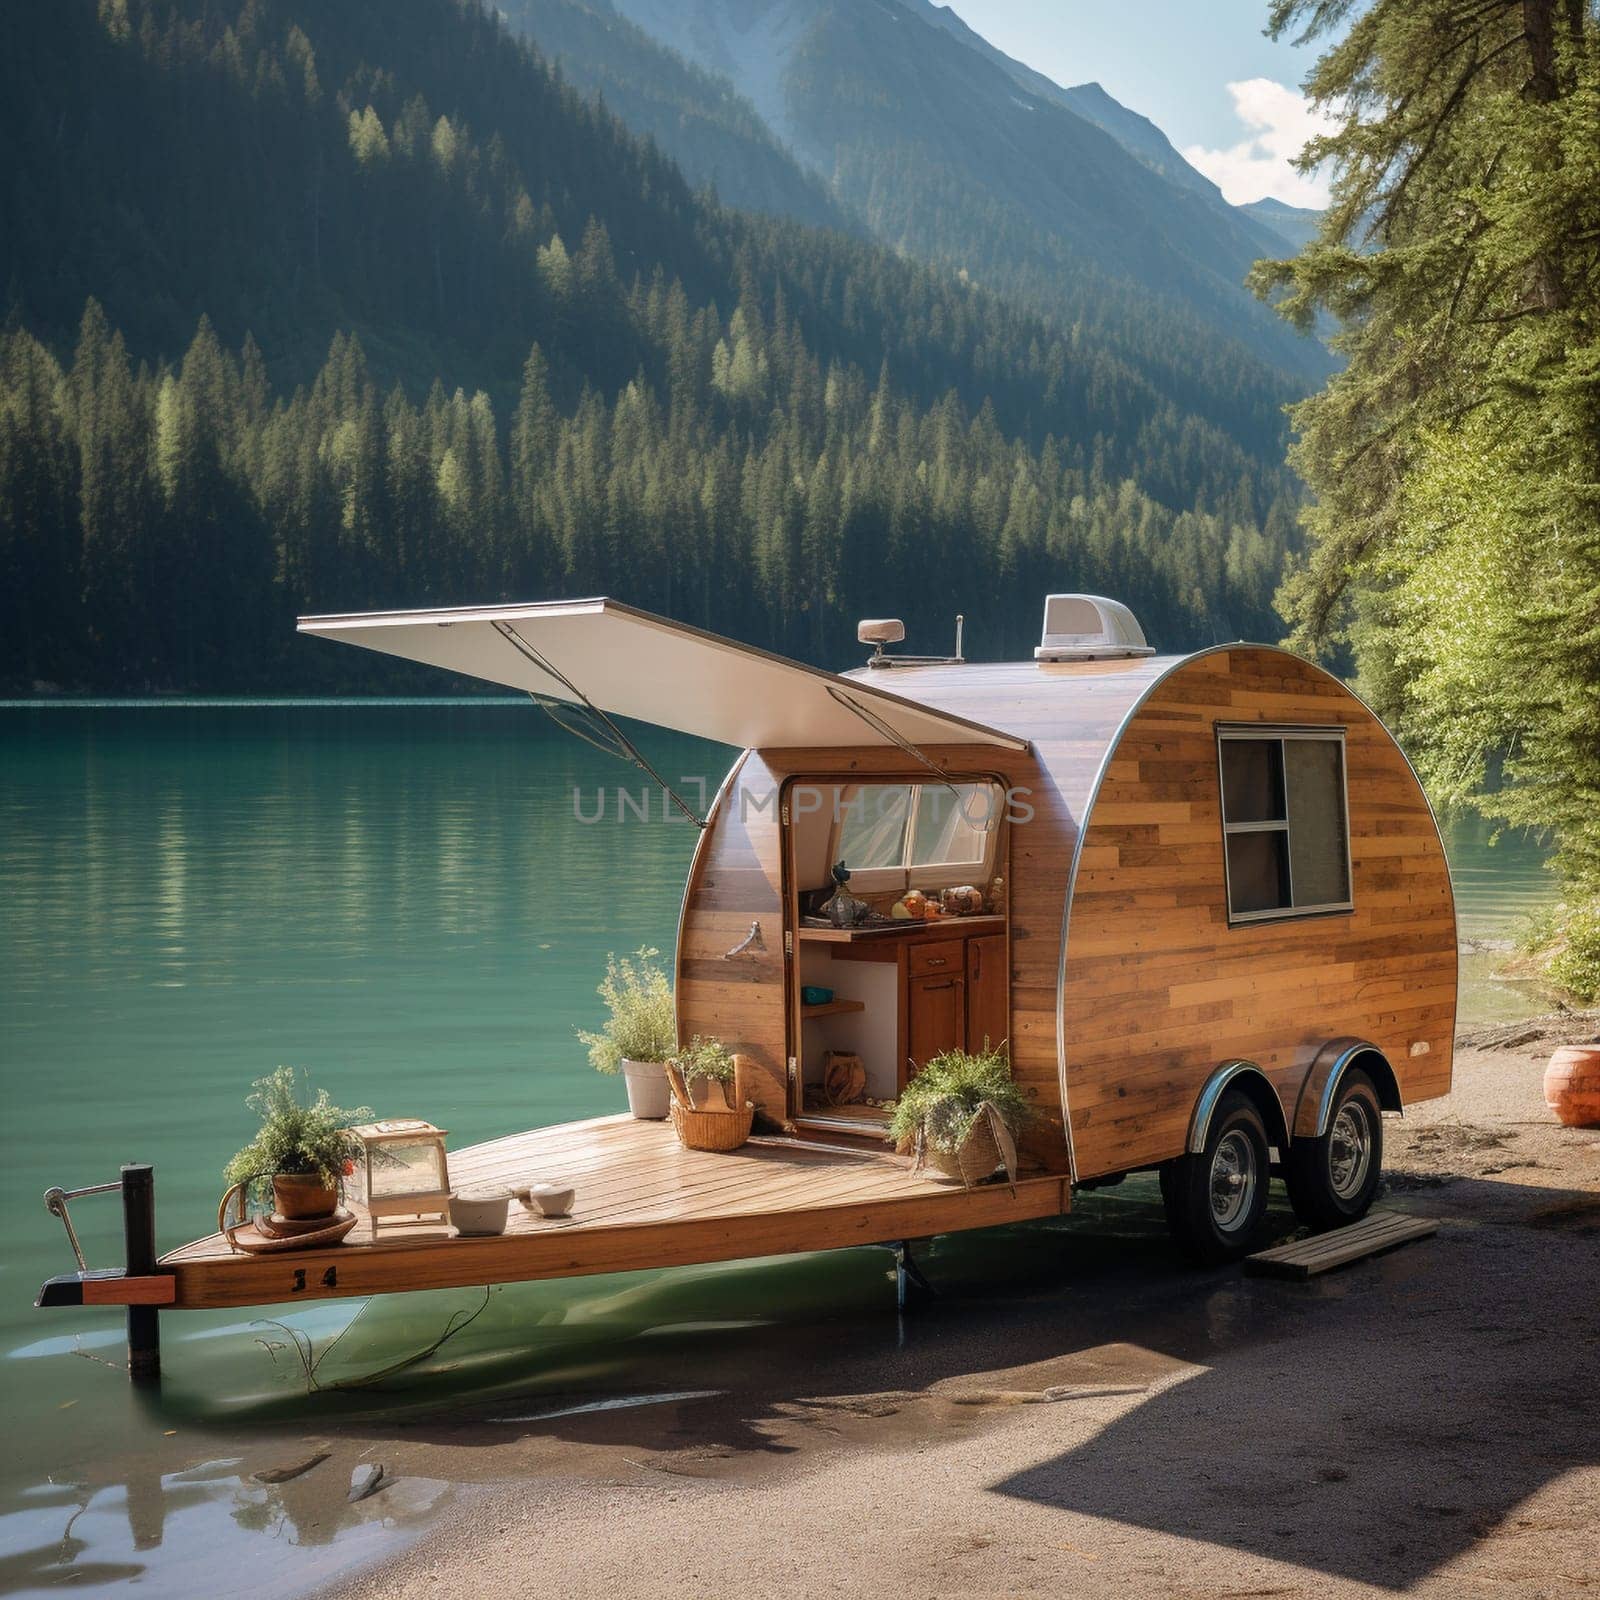 This gorgeous image features a camper trailer parked on the edge of a serene mountain lake, surrounded by a dense forest and snow-capped peaks visible in the background. The trailer's large windows provide stunning views of the lake and the surrounding natural beauty, bringing the tranquility of the outdoors inside. Outside the trailer, a small dock extends from the shore, offering a spot to launch a paddleboard or canoe and explore the calm waters of the lake. A small picnic table and chairs are set up outside the trailer, providing a comfortable and scenic spot to enjoy a meal with family and friends while taking in the stunning views.